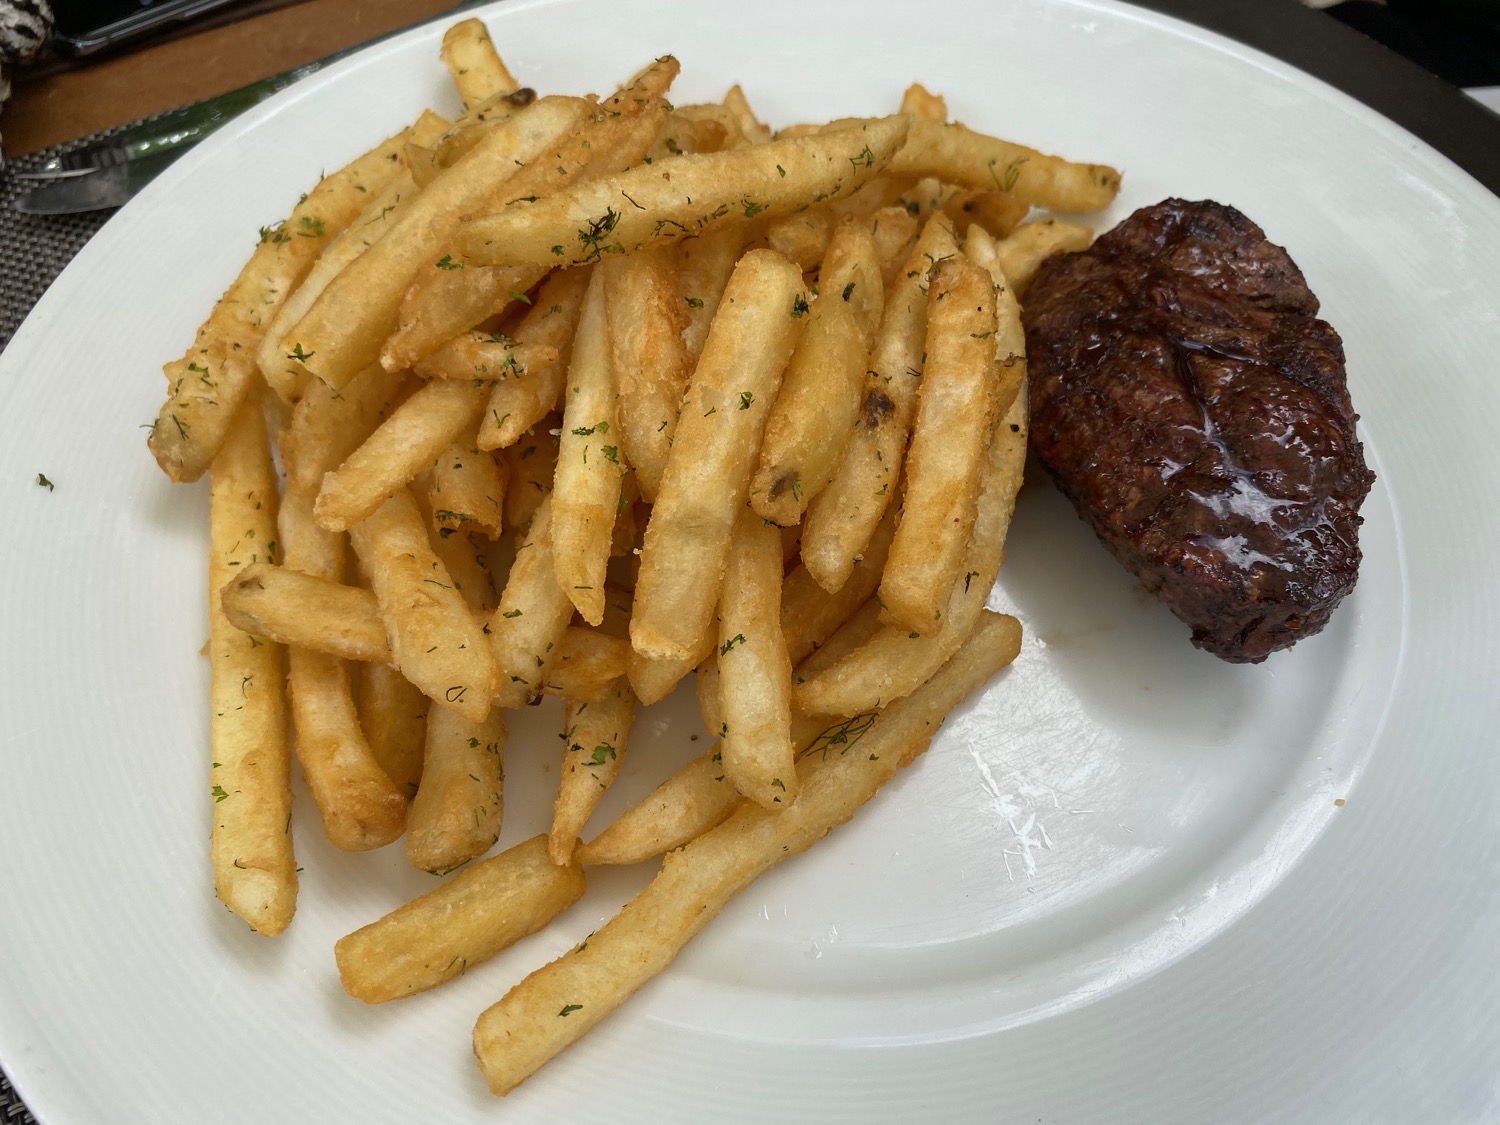 a plate of french fries and steak